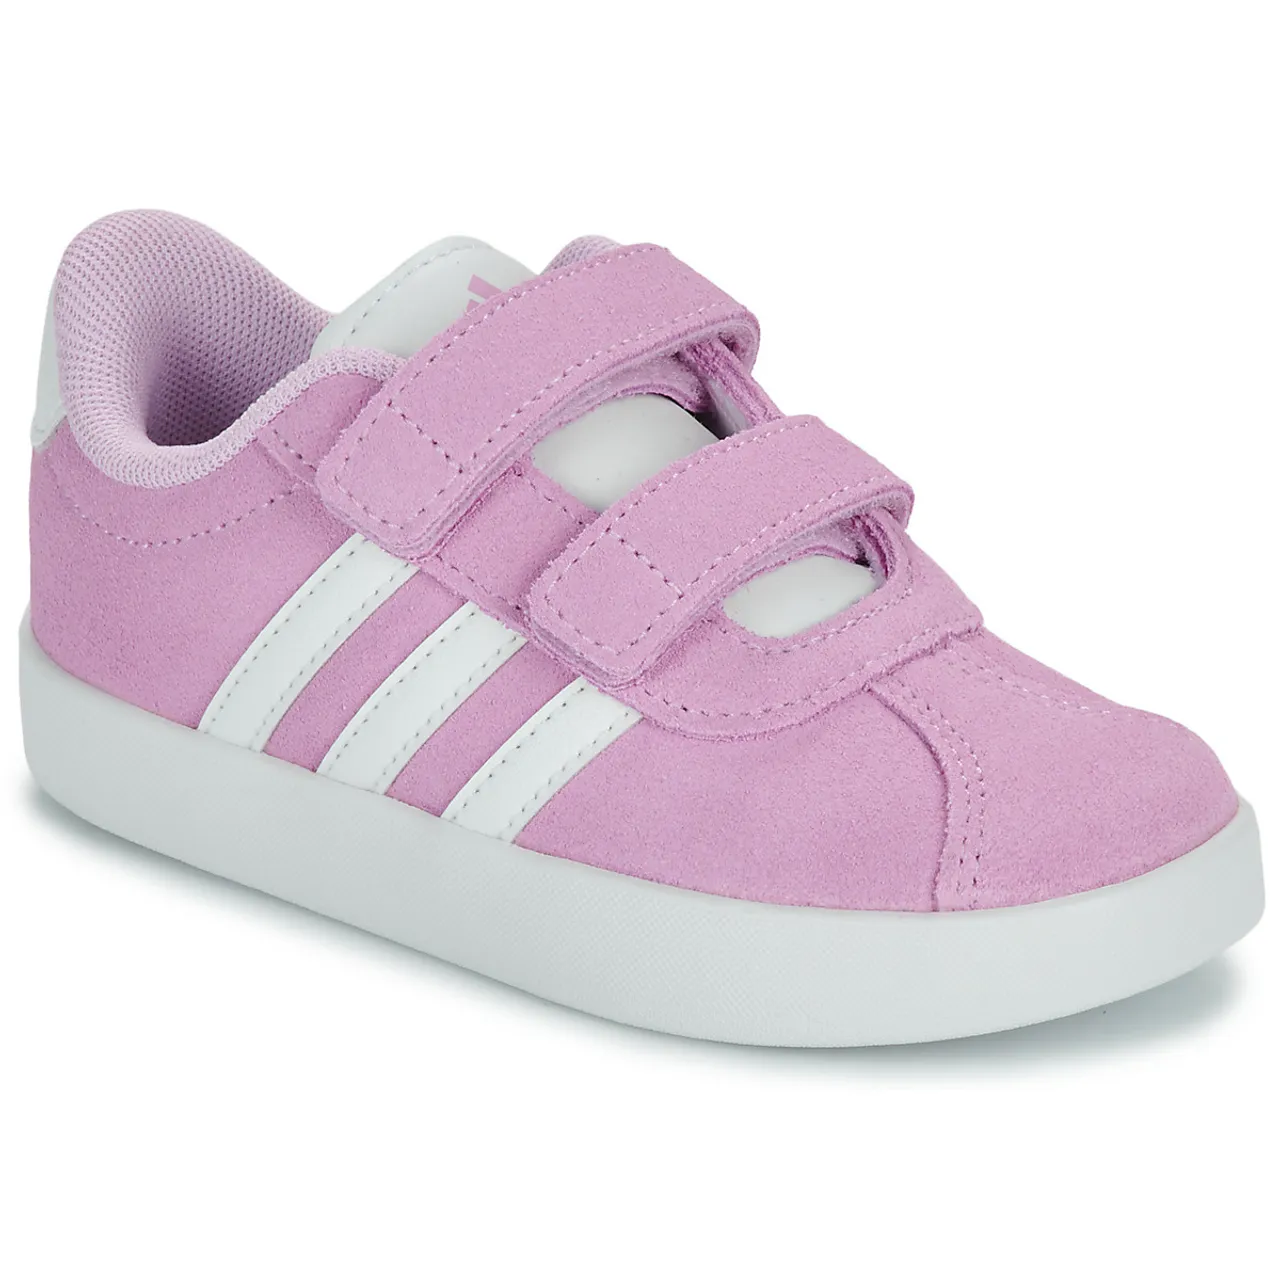 adidas  VL COURT 3.0 CF I  girls's Children's Shoes (Trainers) in Pink